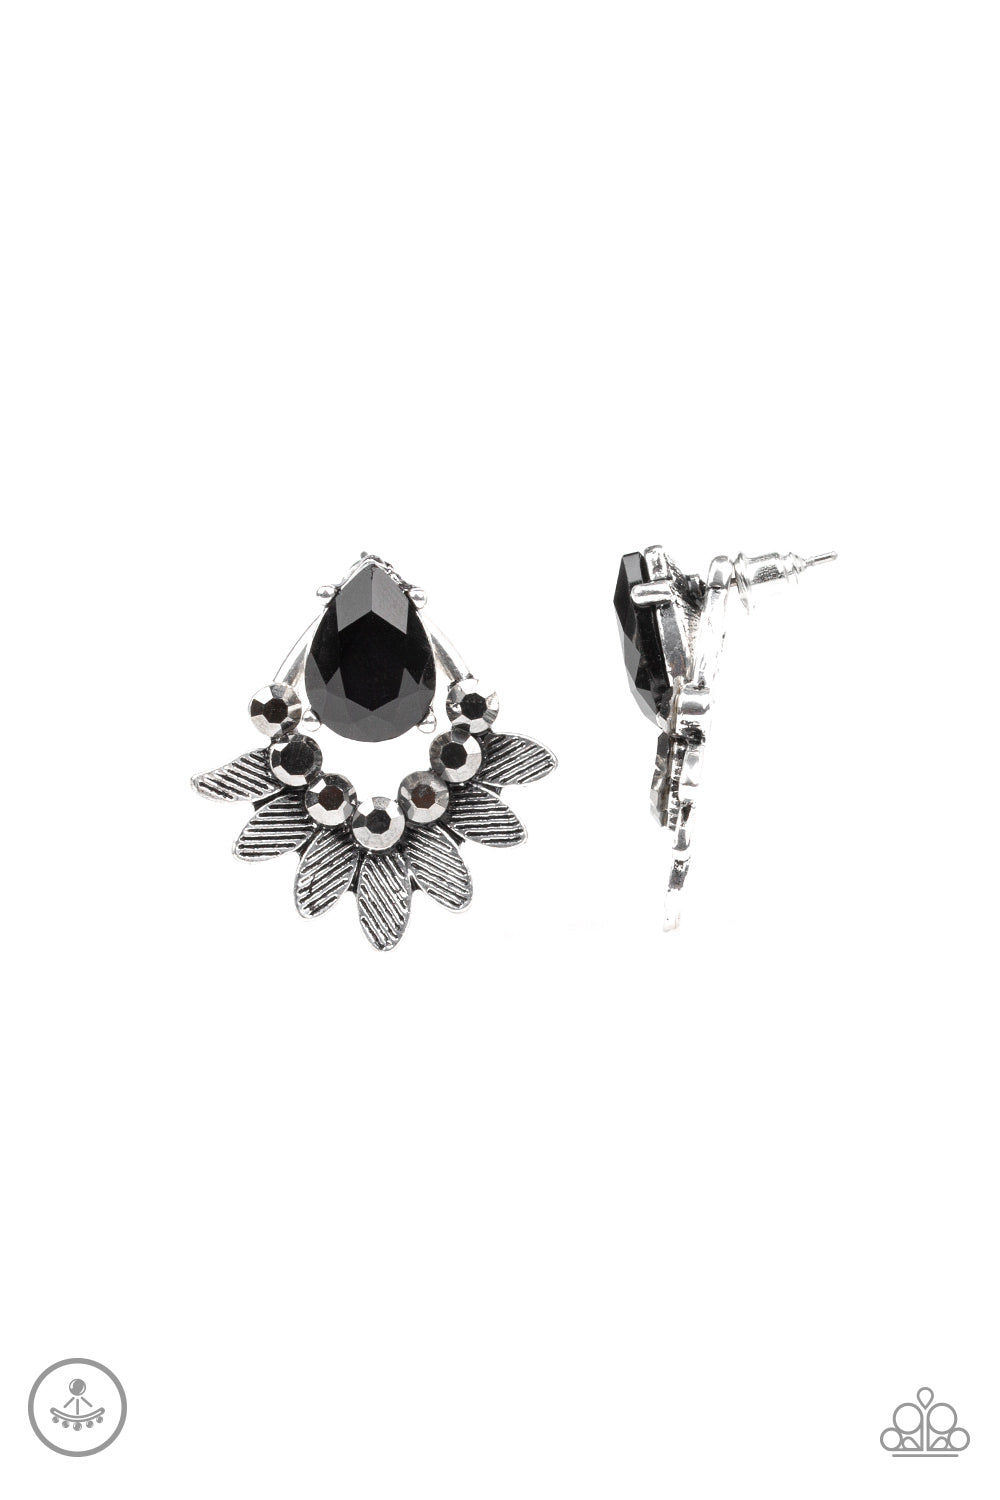 Crystal Canopy - Black - Earrings - Paparazzi Accessories